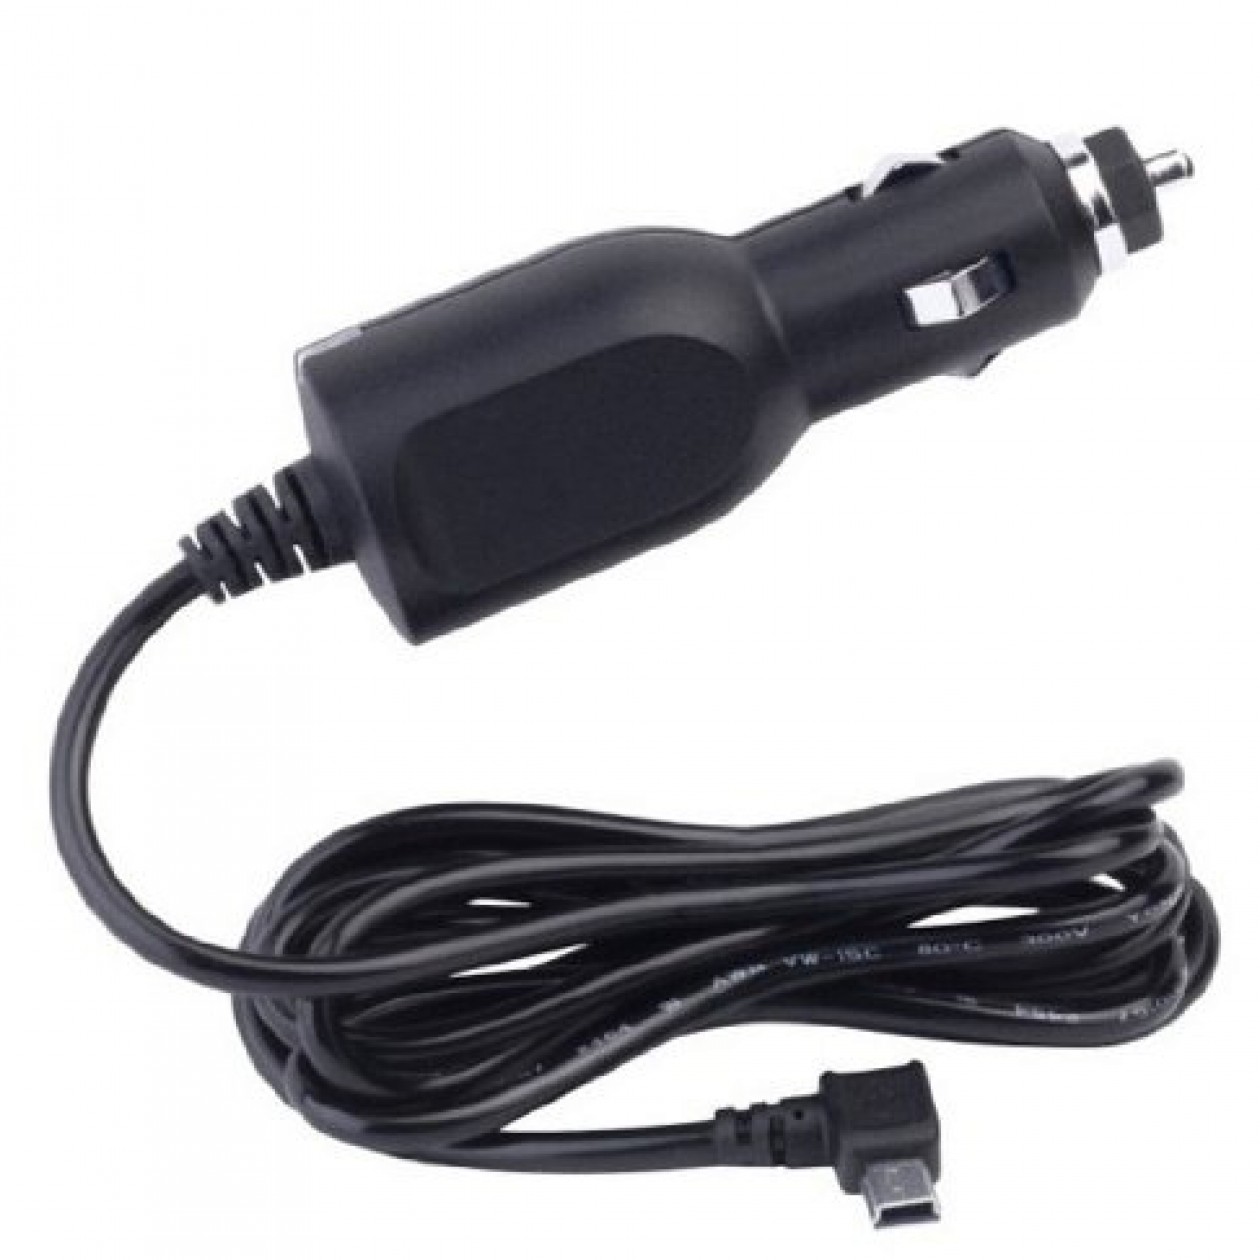 In Car Charger - Tomtom USB Car Charger Mini USB end NOT MICRO USB